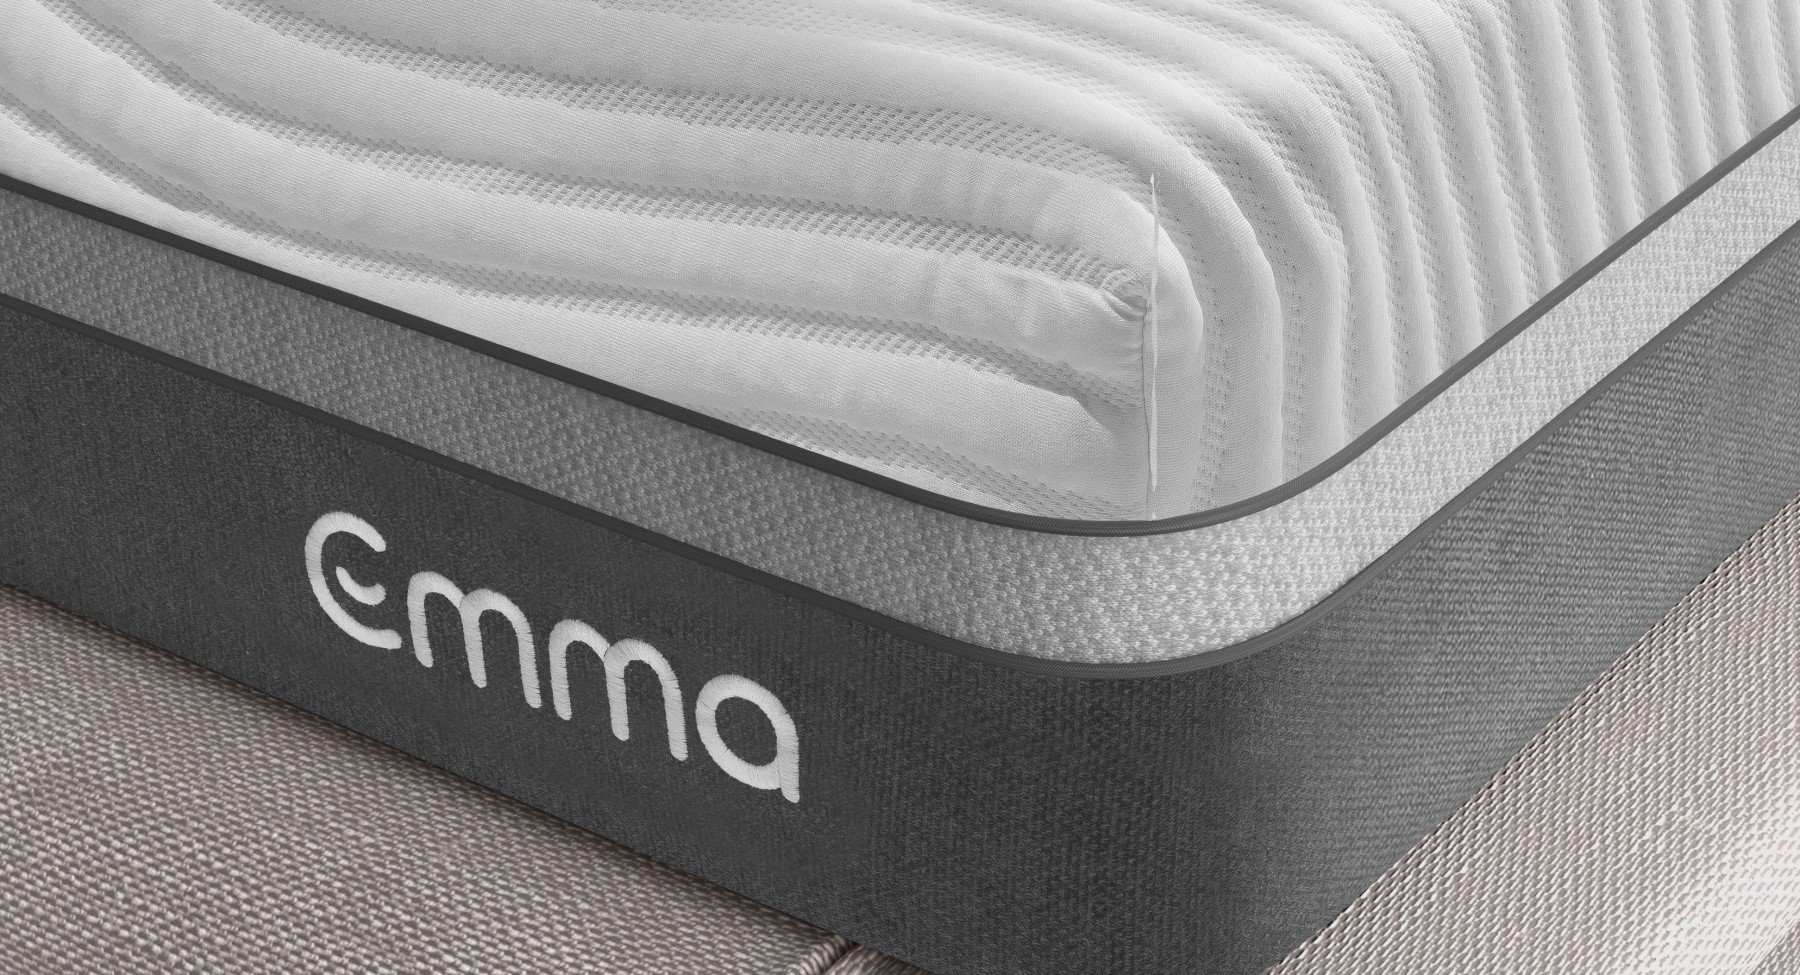 emma mattress have separate topper on it